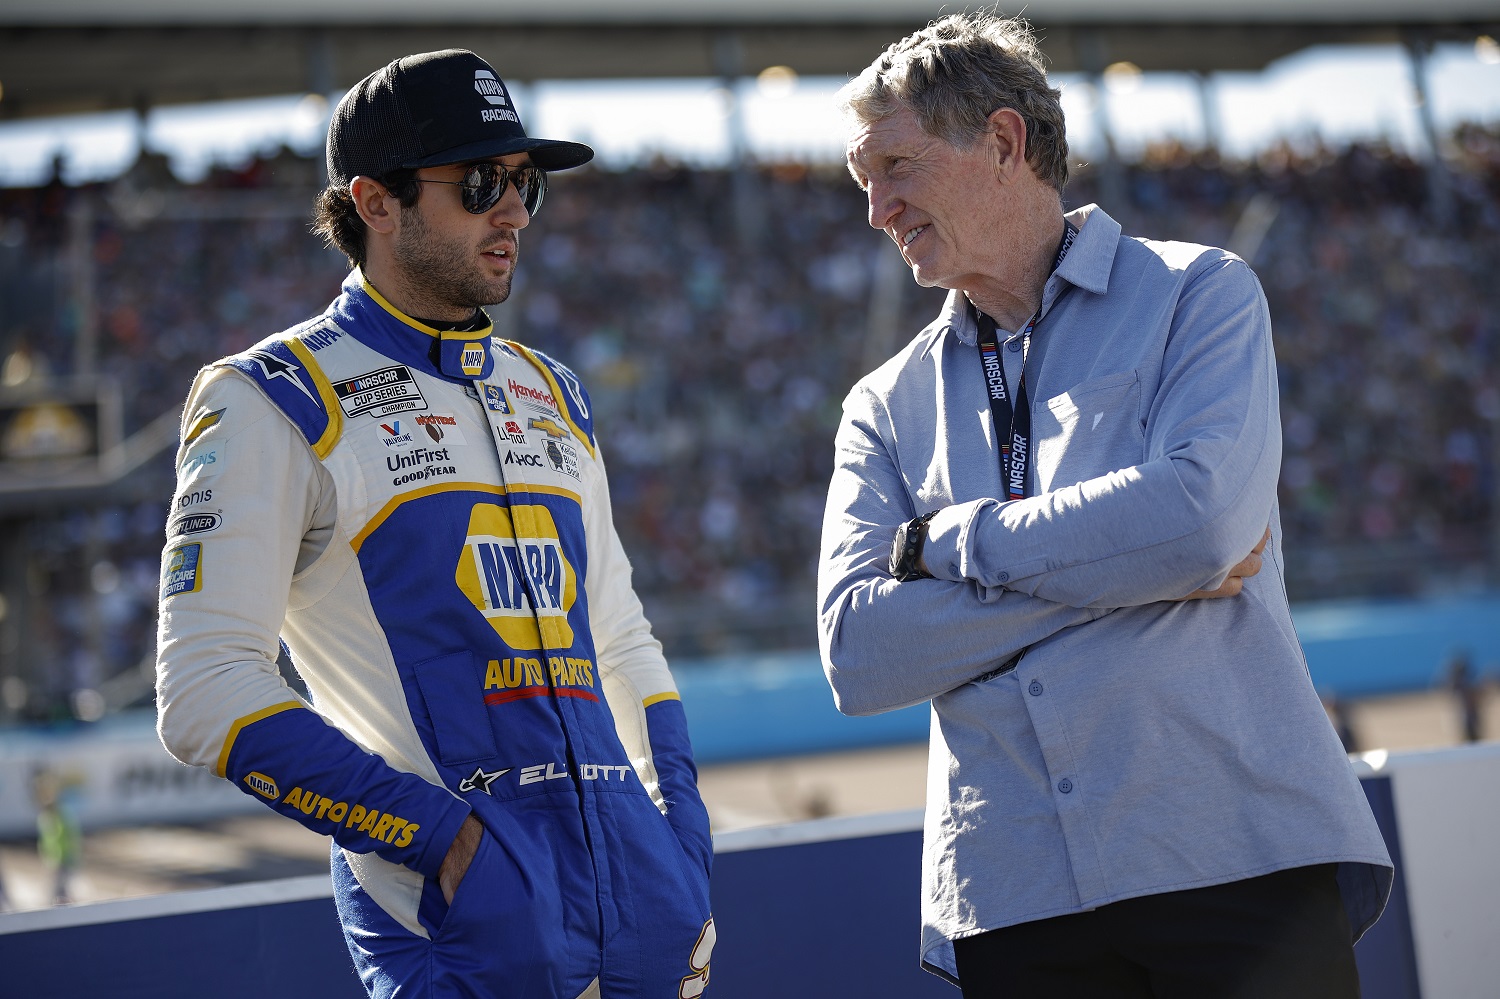 Chase Elliott talks to his father, Hall of Famer Bill Elliott, on the grid prior to the NASCAR Cup Series Championship at Phoenix Raceway on Nov. 6, 2022.